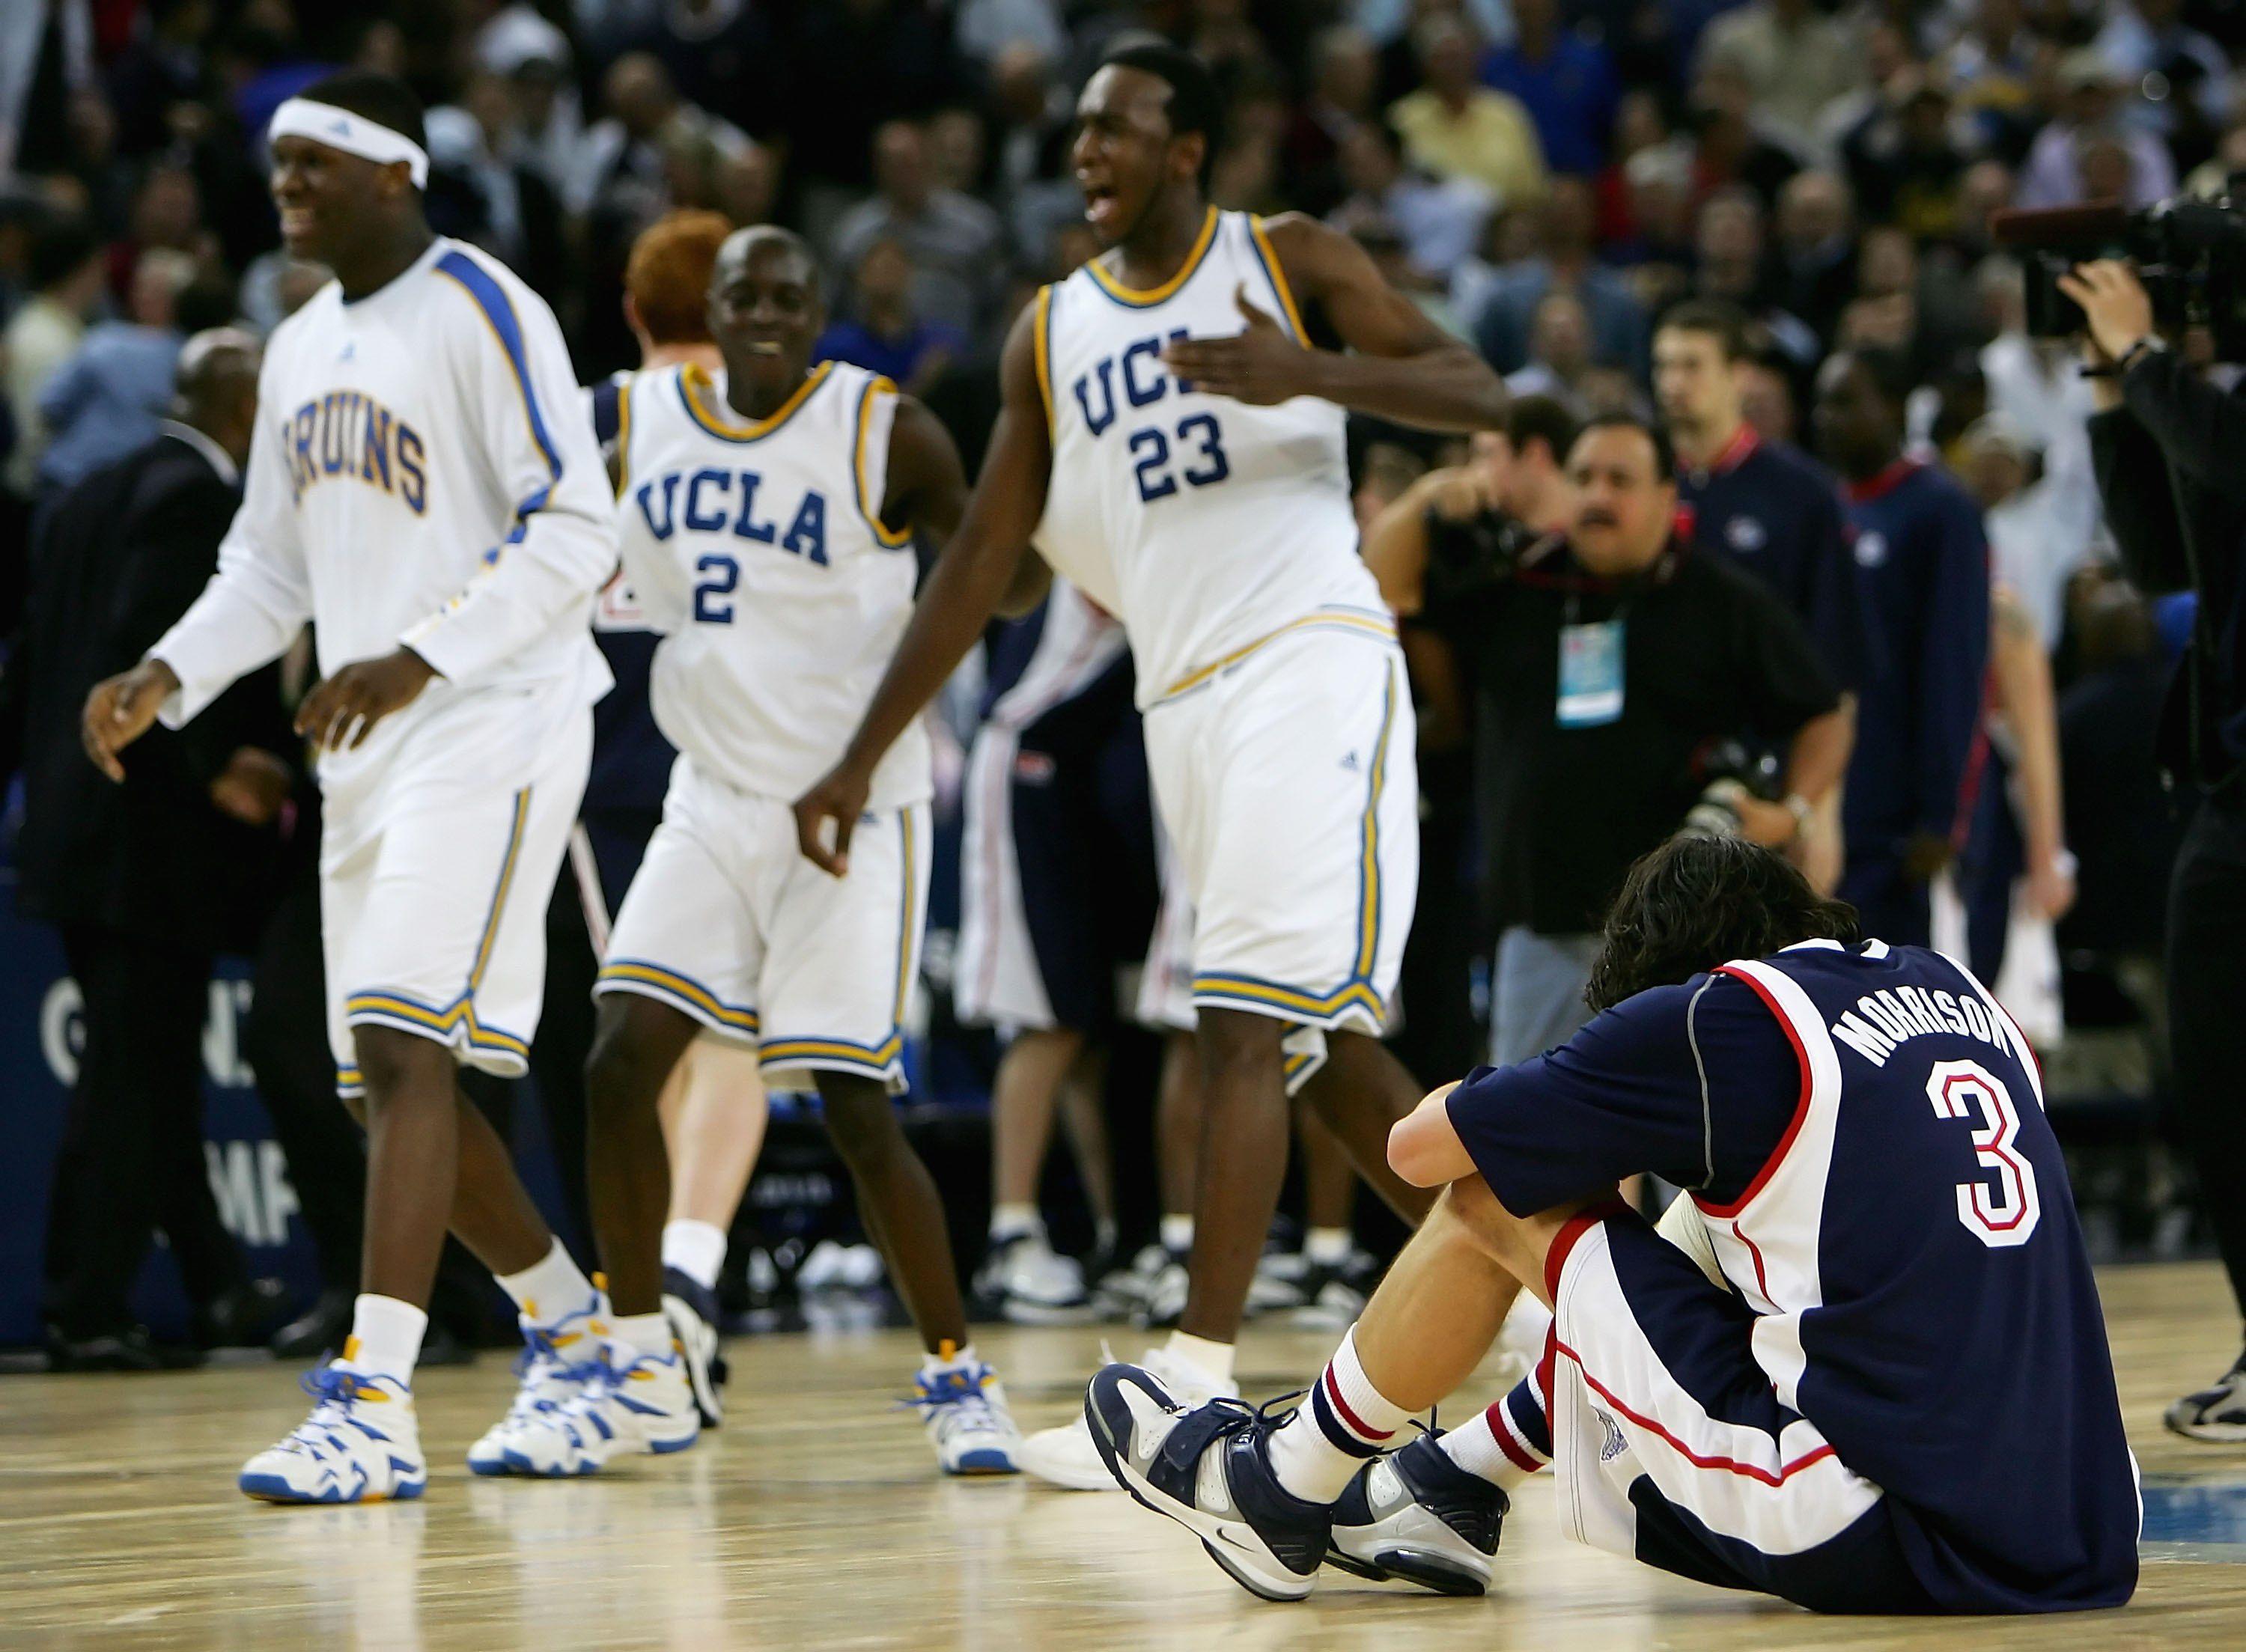 How Gonzaga became America's most polarizing college basketball